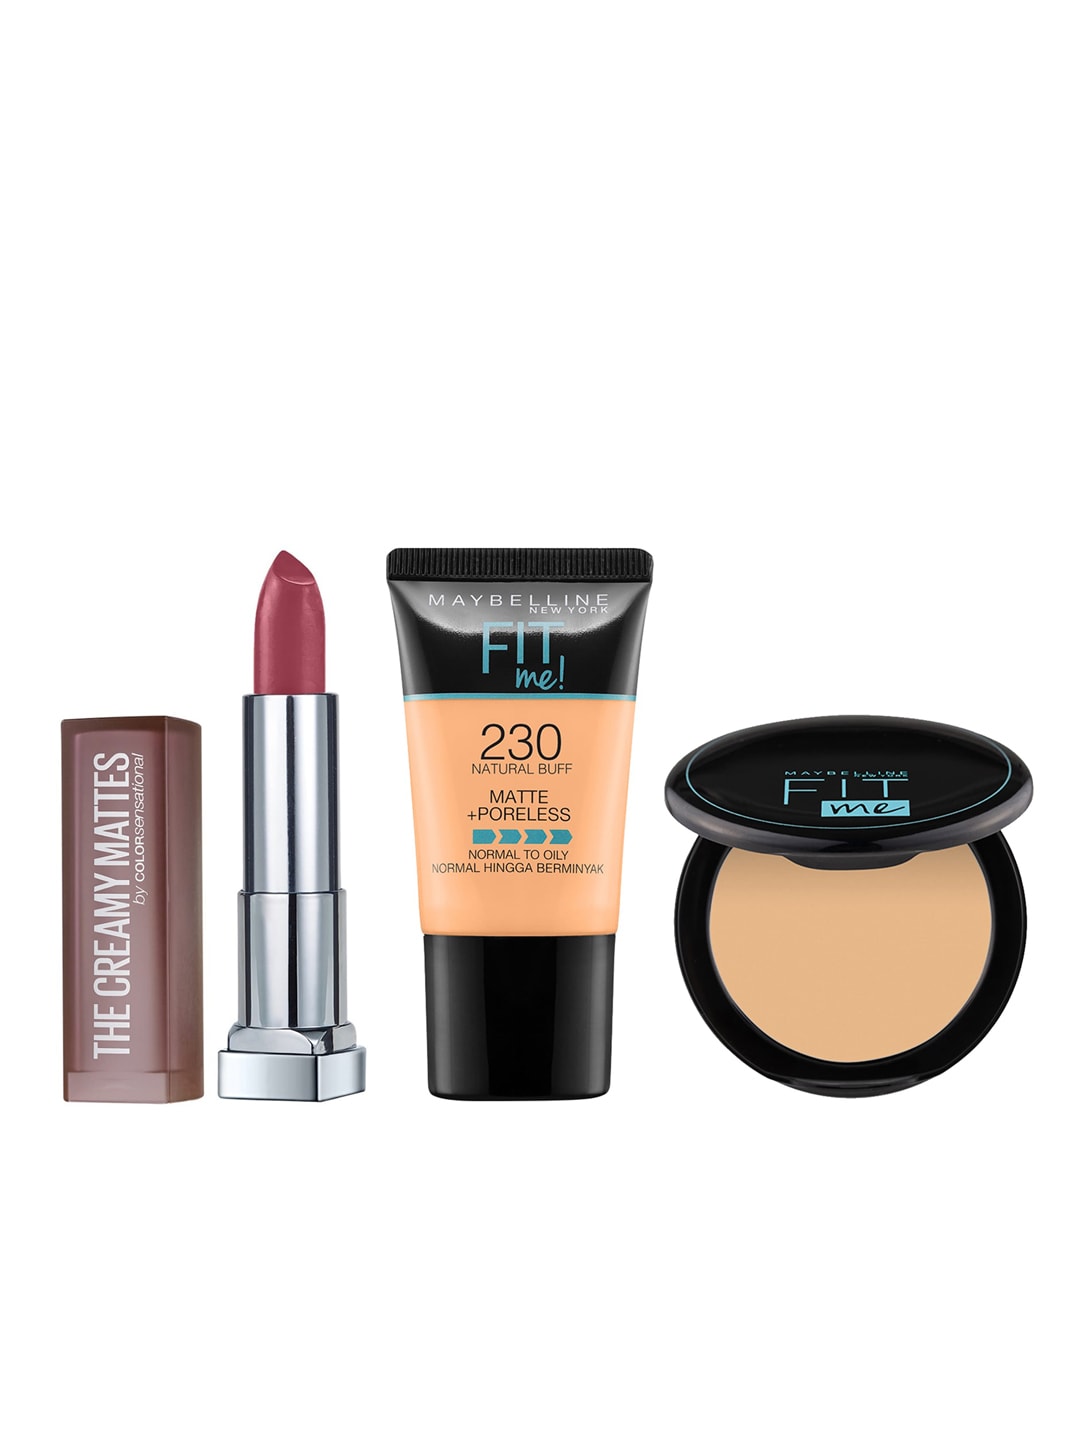 Maybelline Set of Foundation-Compact & Lipstick Price in India